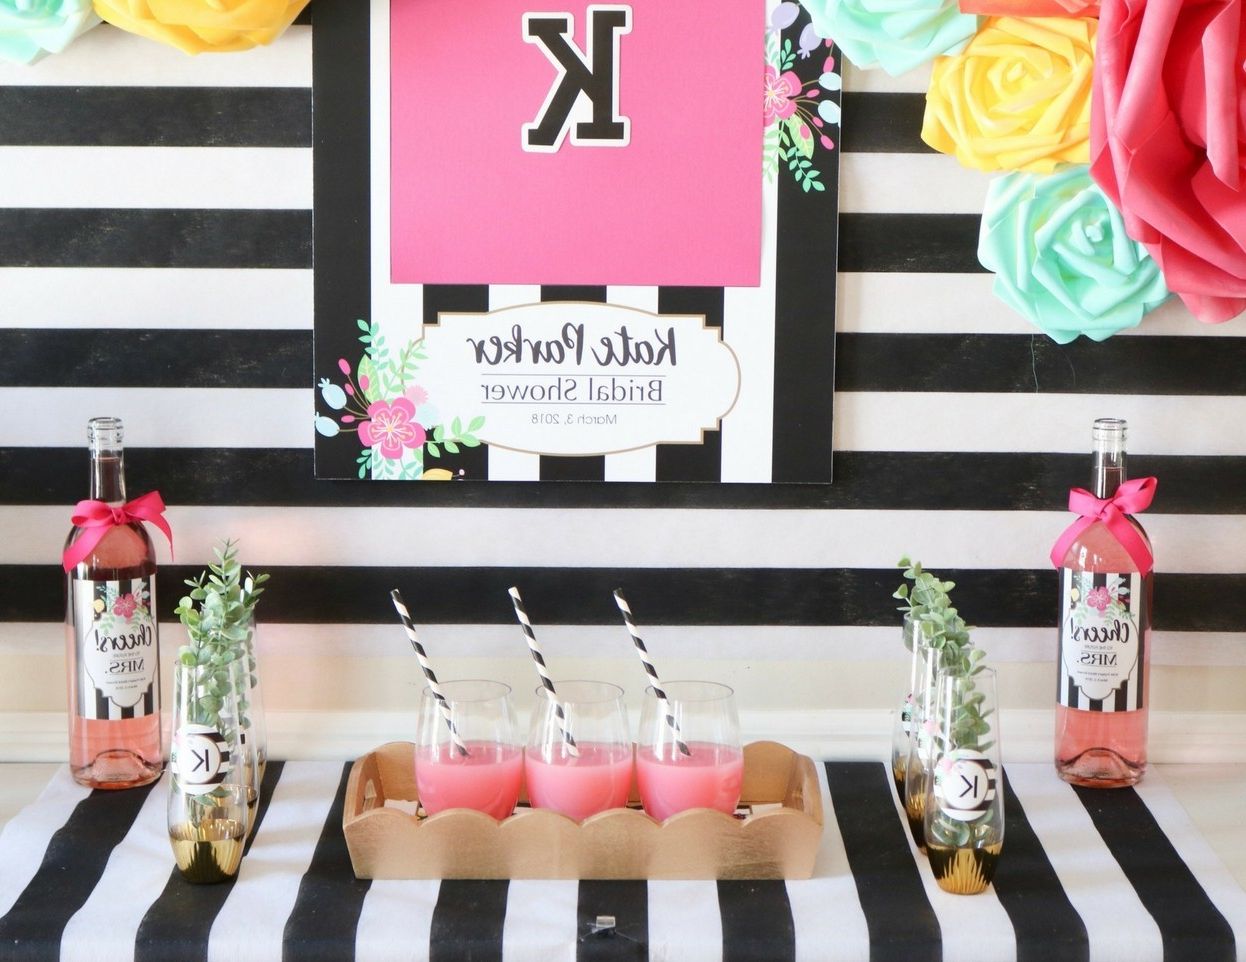 Make A Bridal Shower Backdrop & Buffet | Fun365 Within Six Stripes Buffets (View 9 of 20)